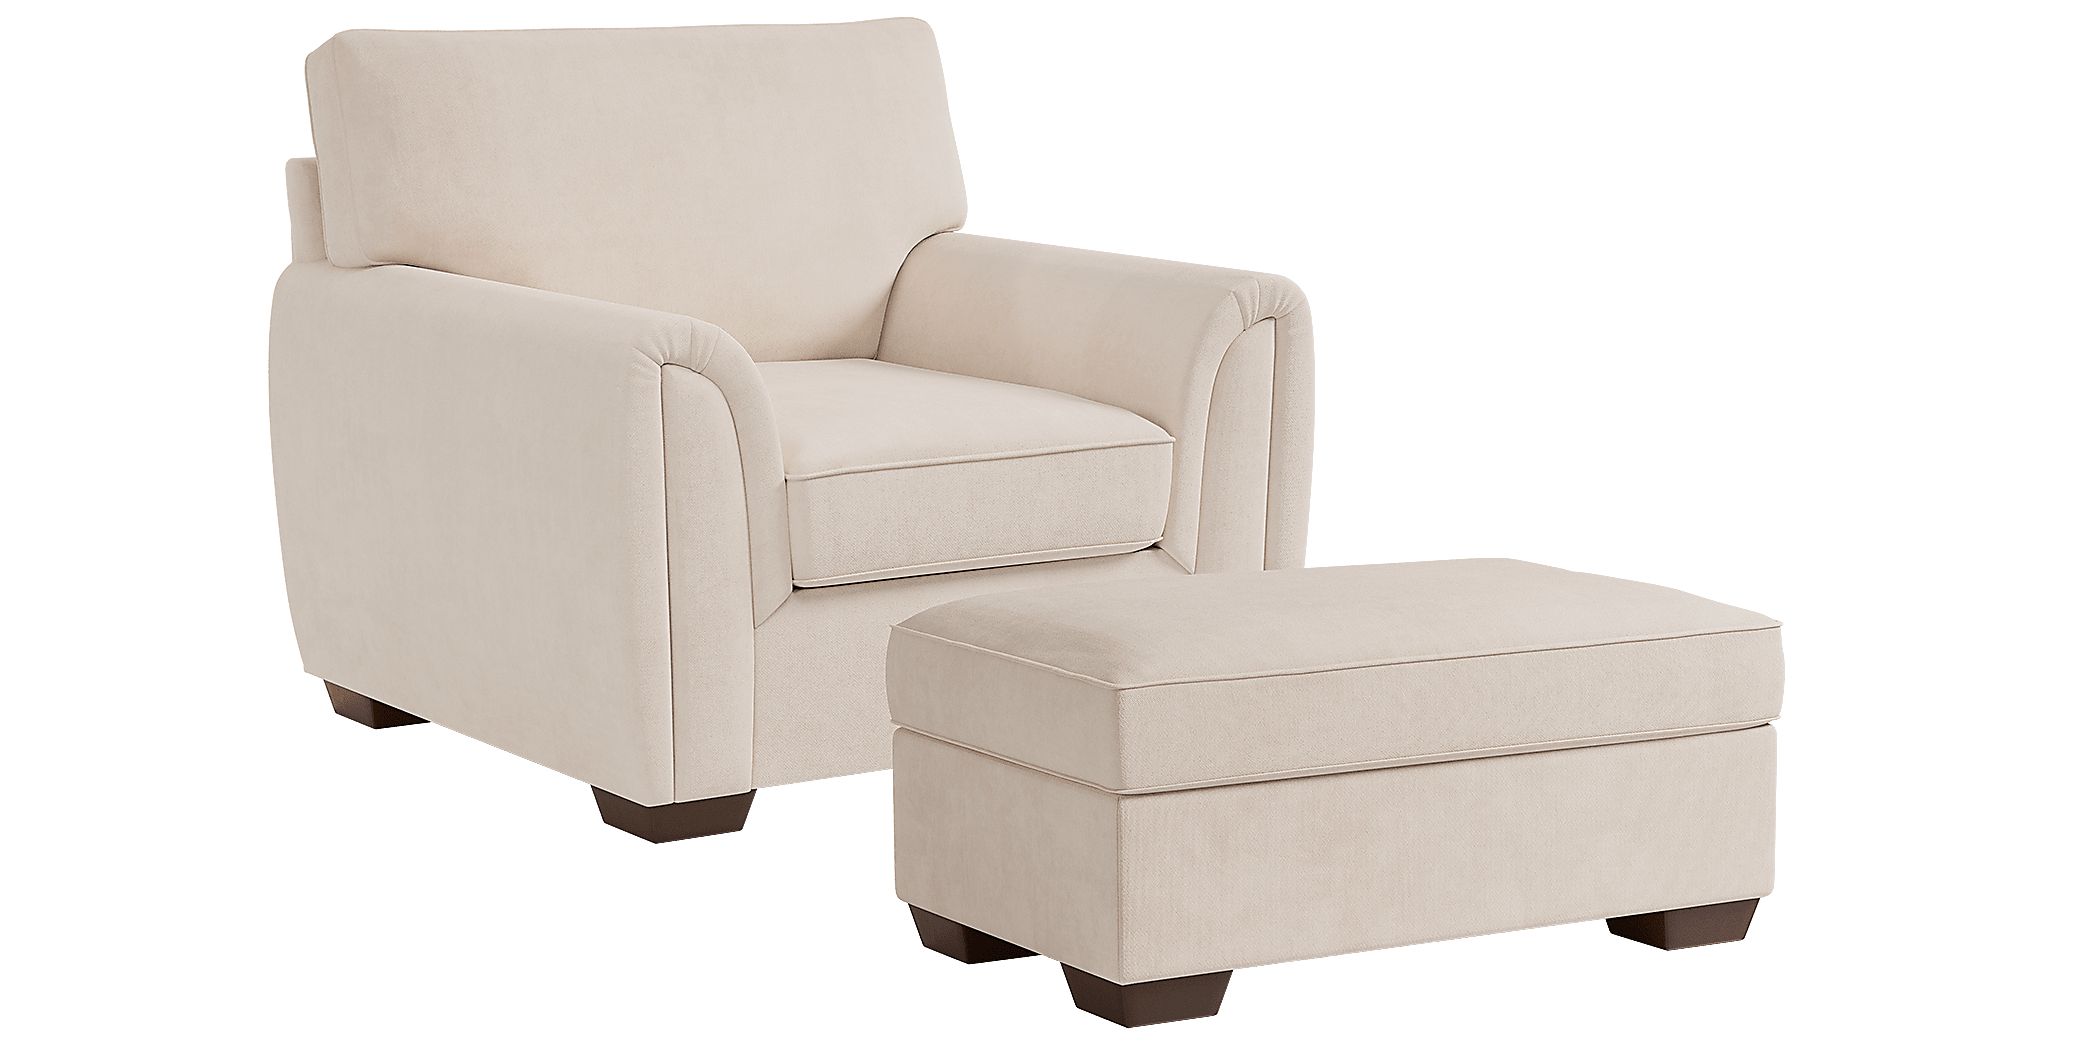 Rooms To Go Amalie Beige Chair and Ottoman